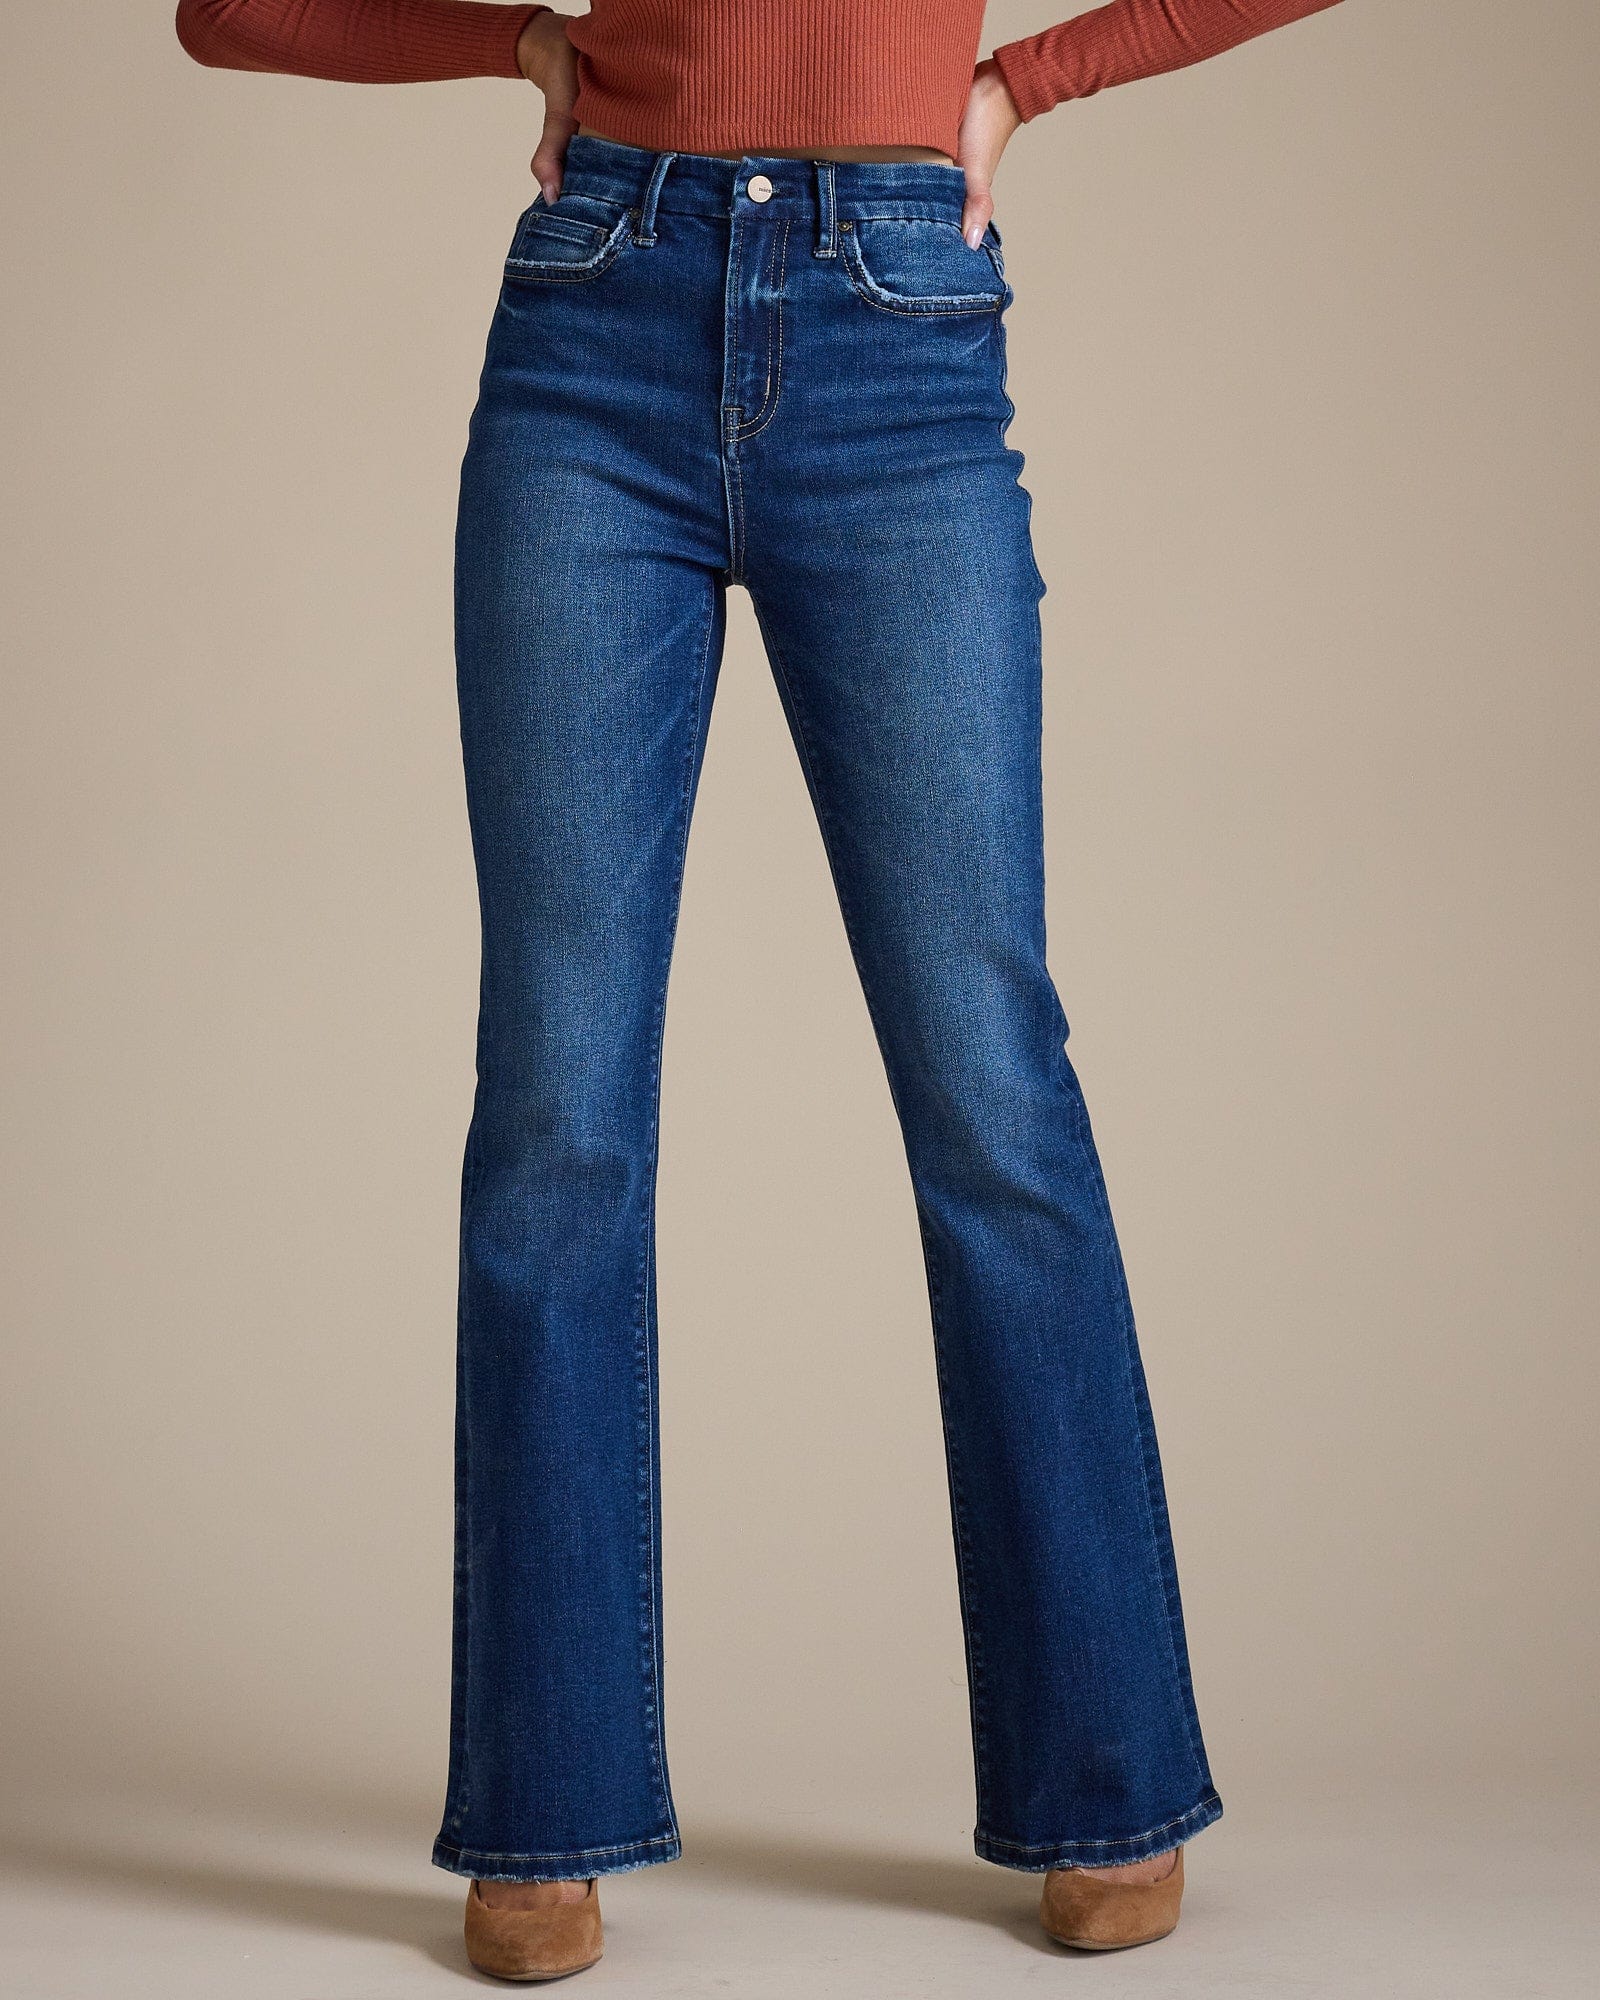 Woman in blue high-rise bootcut jeans